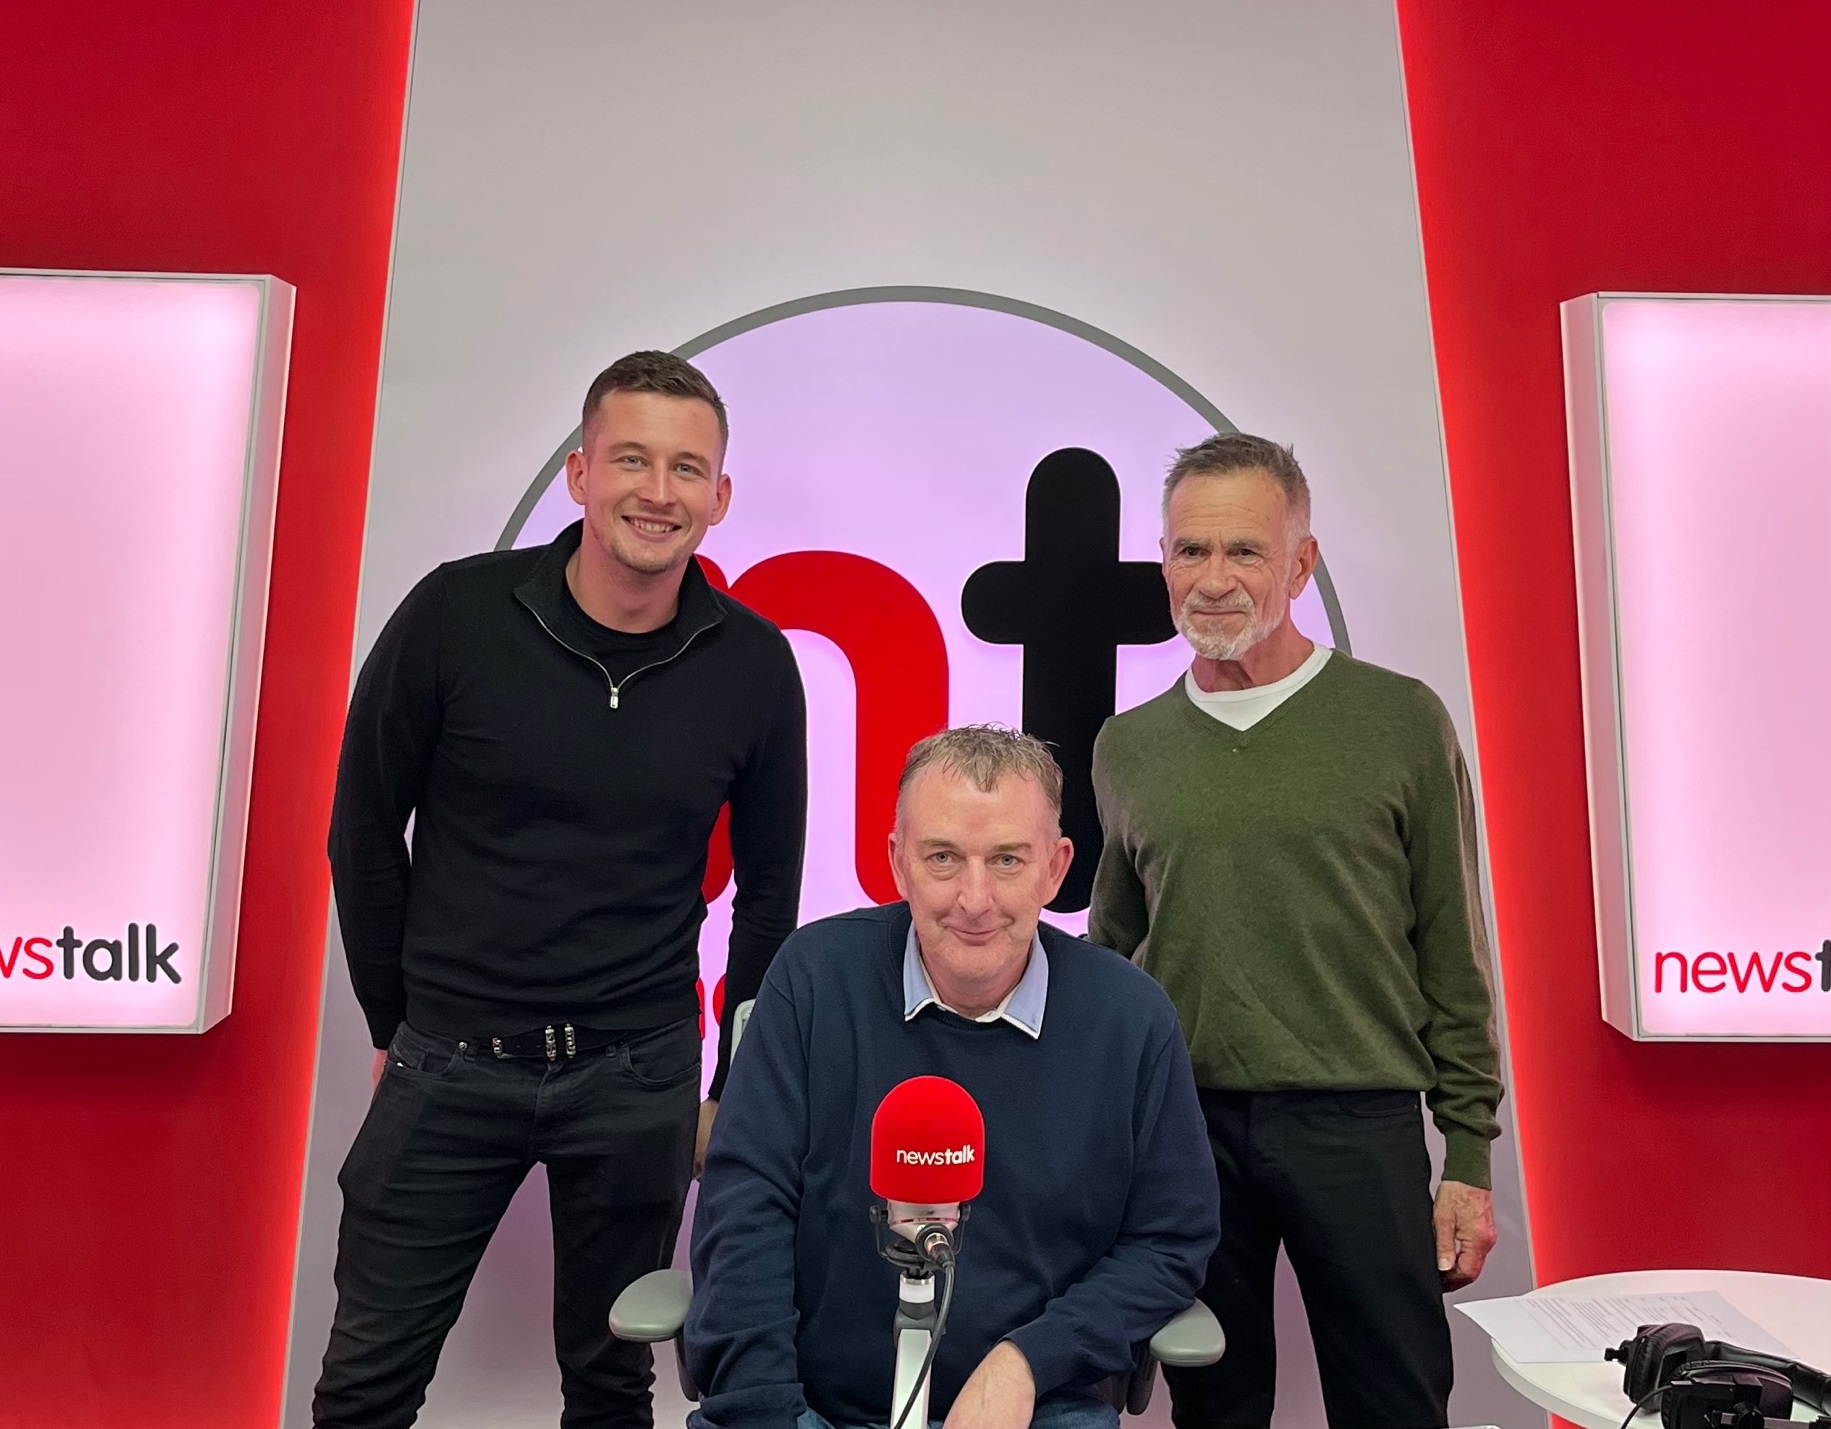 Aaron and Michael in Newstalk studios with presenter Adrian Kennedy.